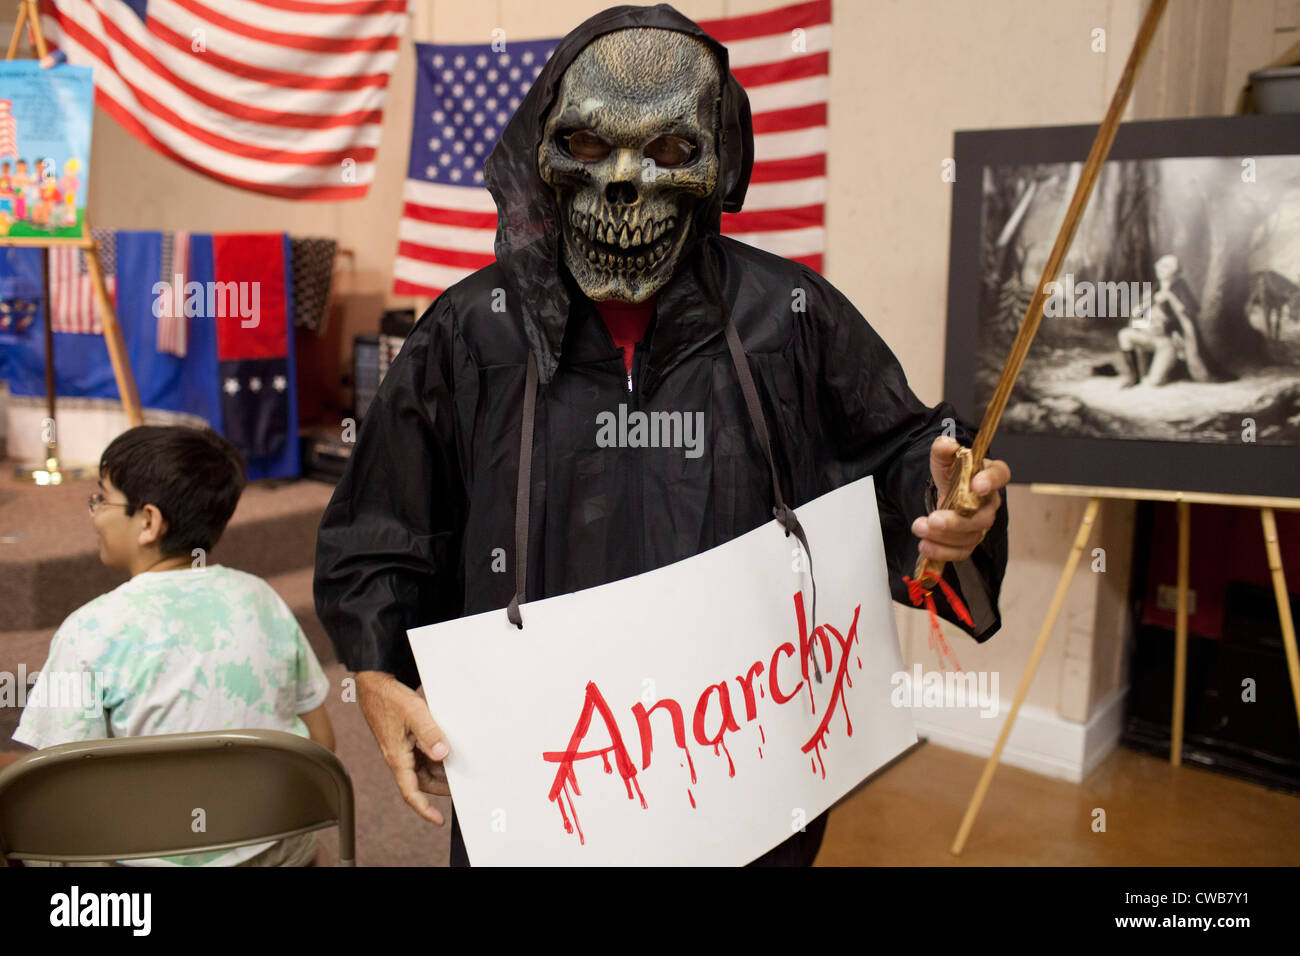 Volunteer dressed as ghoulish 'Anarchy' helps teach lesson on balancing tyranny and anarchy in order to achieve, sustain liberty Stock Photo